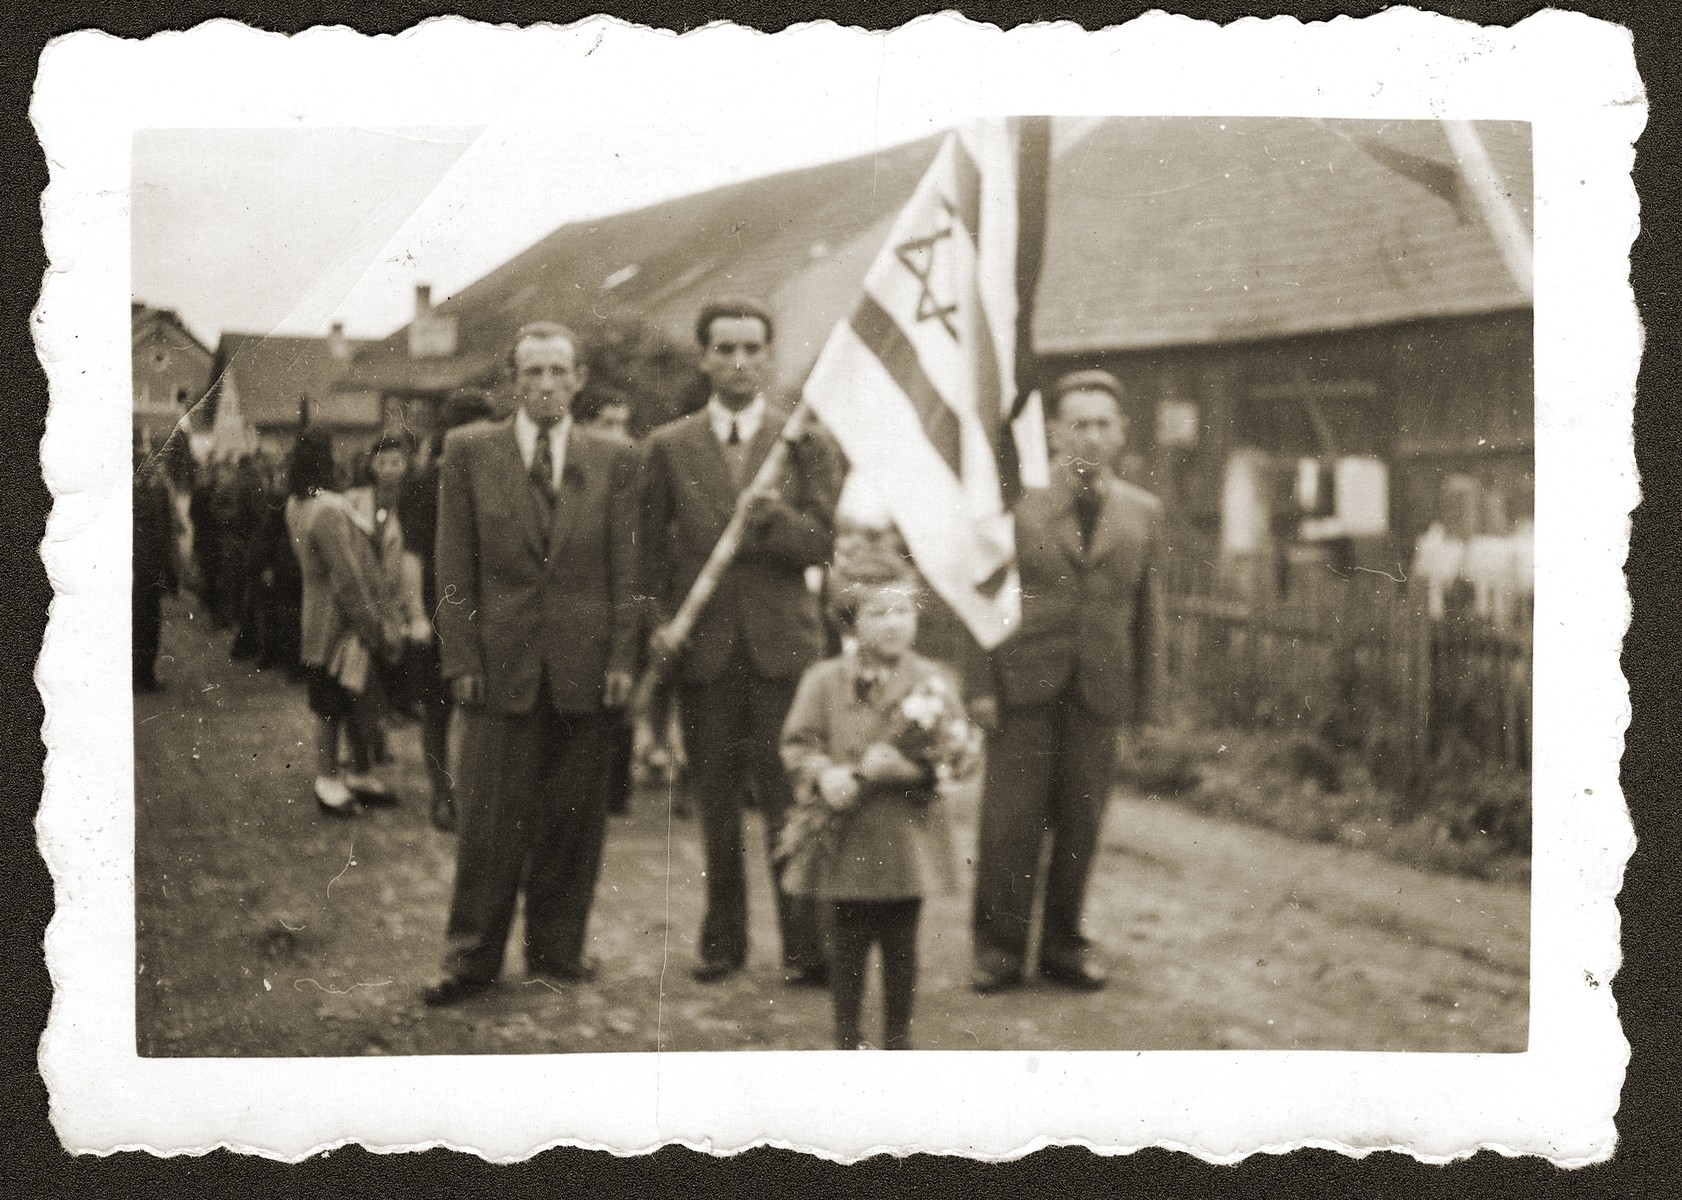 Mania Sztajman leads a procession of DPs to the Jewish cemetery near Woerth an der Donau, where they will celebrate Israeli Independence Day.